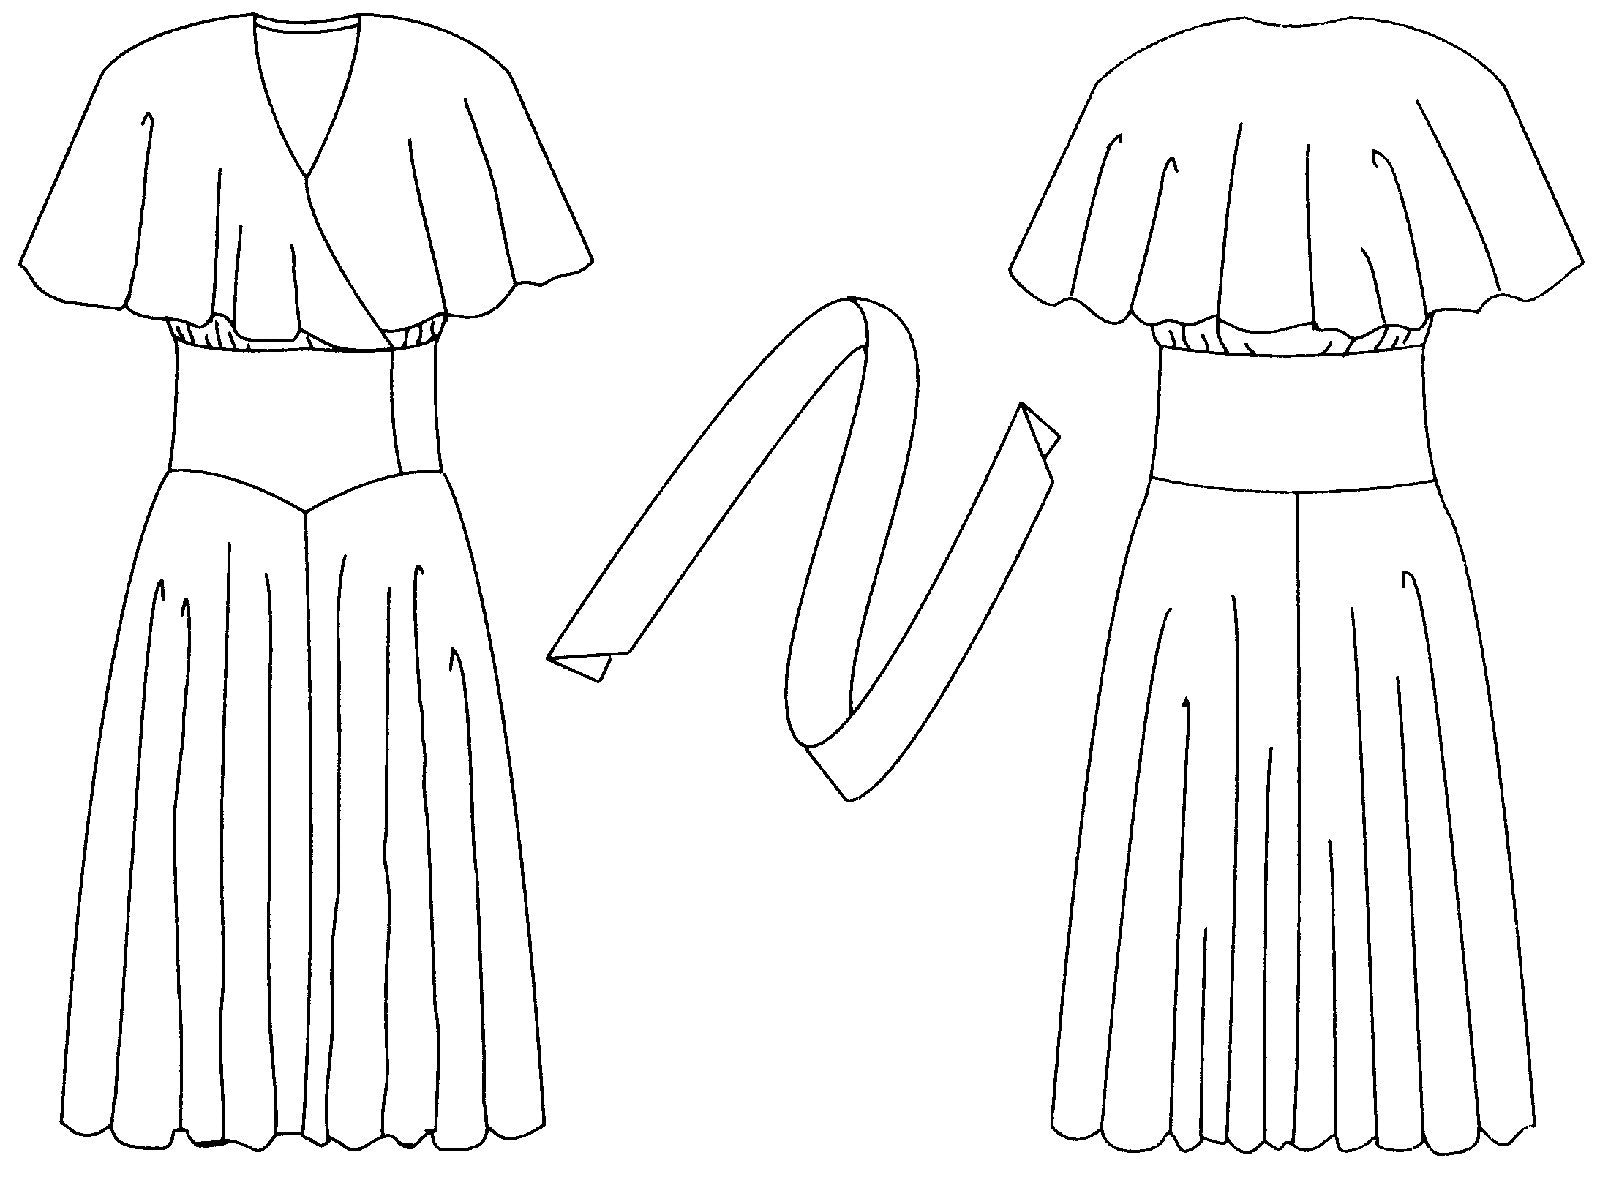 Flat line drawing of front and back views of Beach Pyjamas.